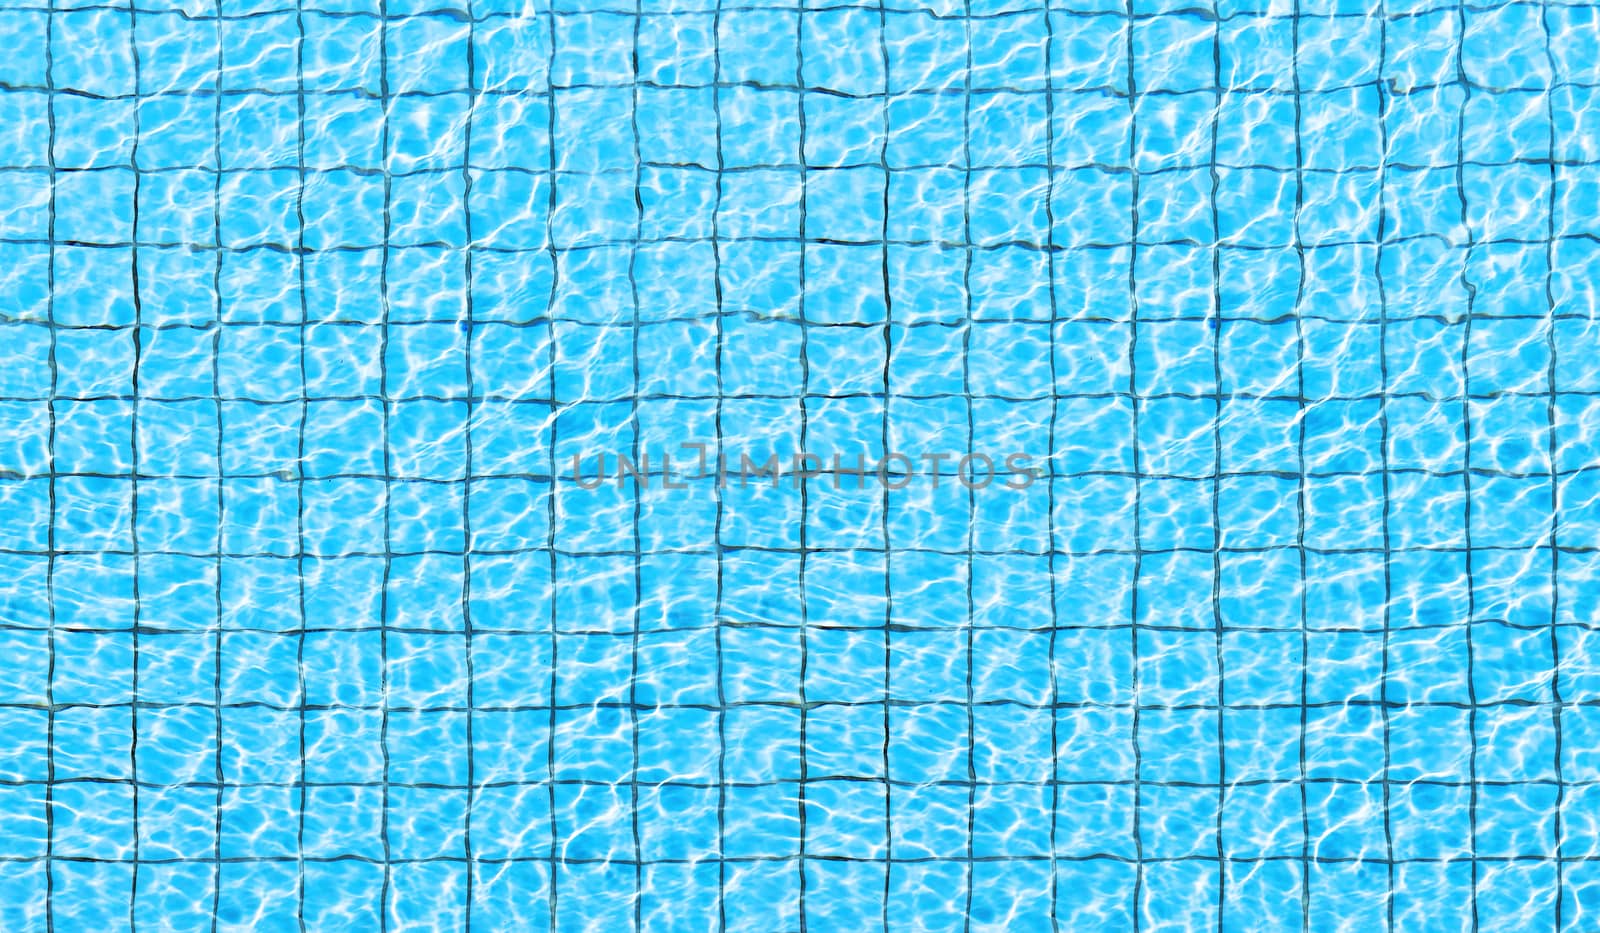 Top view of swimming pool bottom caustics ripple and flow with waves background. Summer background. Texture of water surface. 